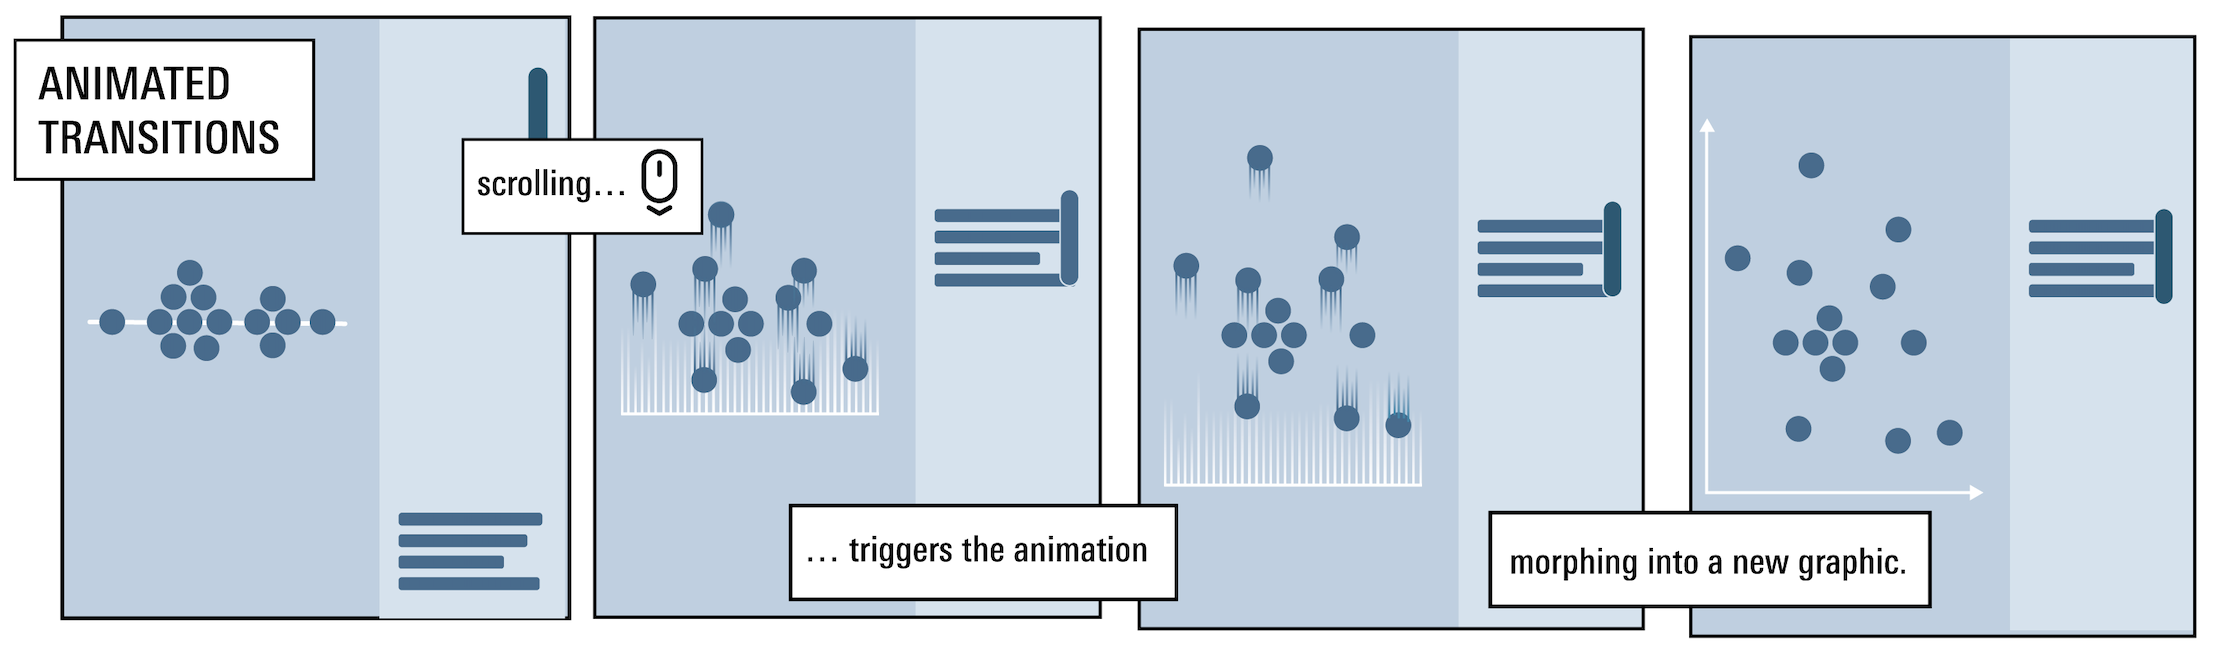 A four panel illustration of how animated transitions work, with the text 'Scrolling... triggers the animation morphing into a new graphic'